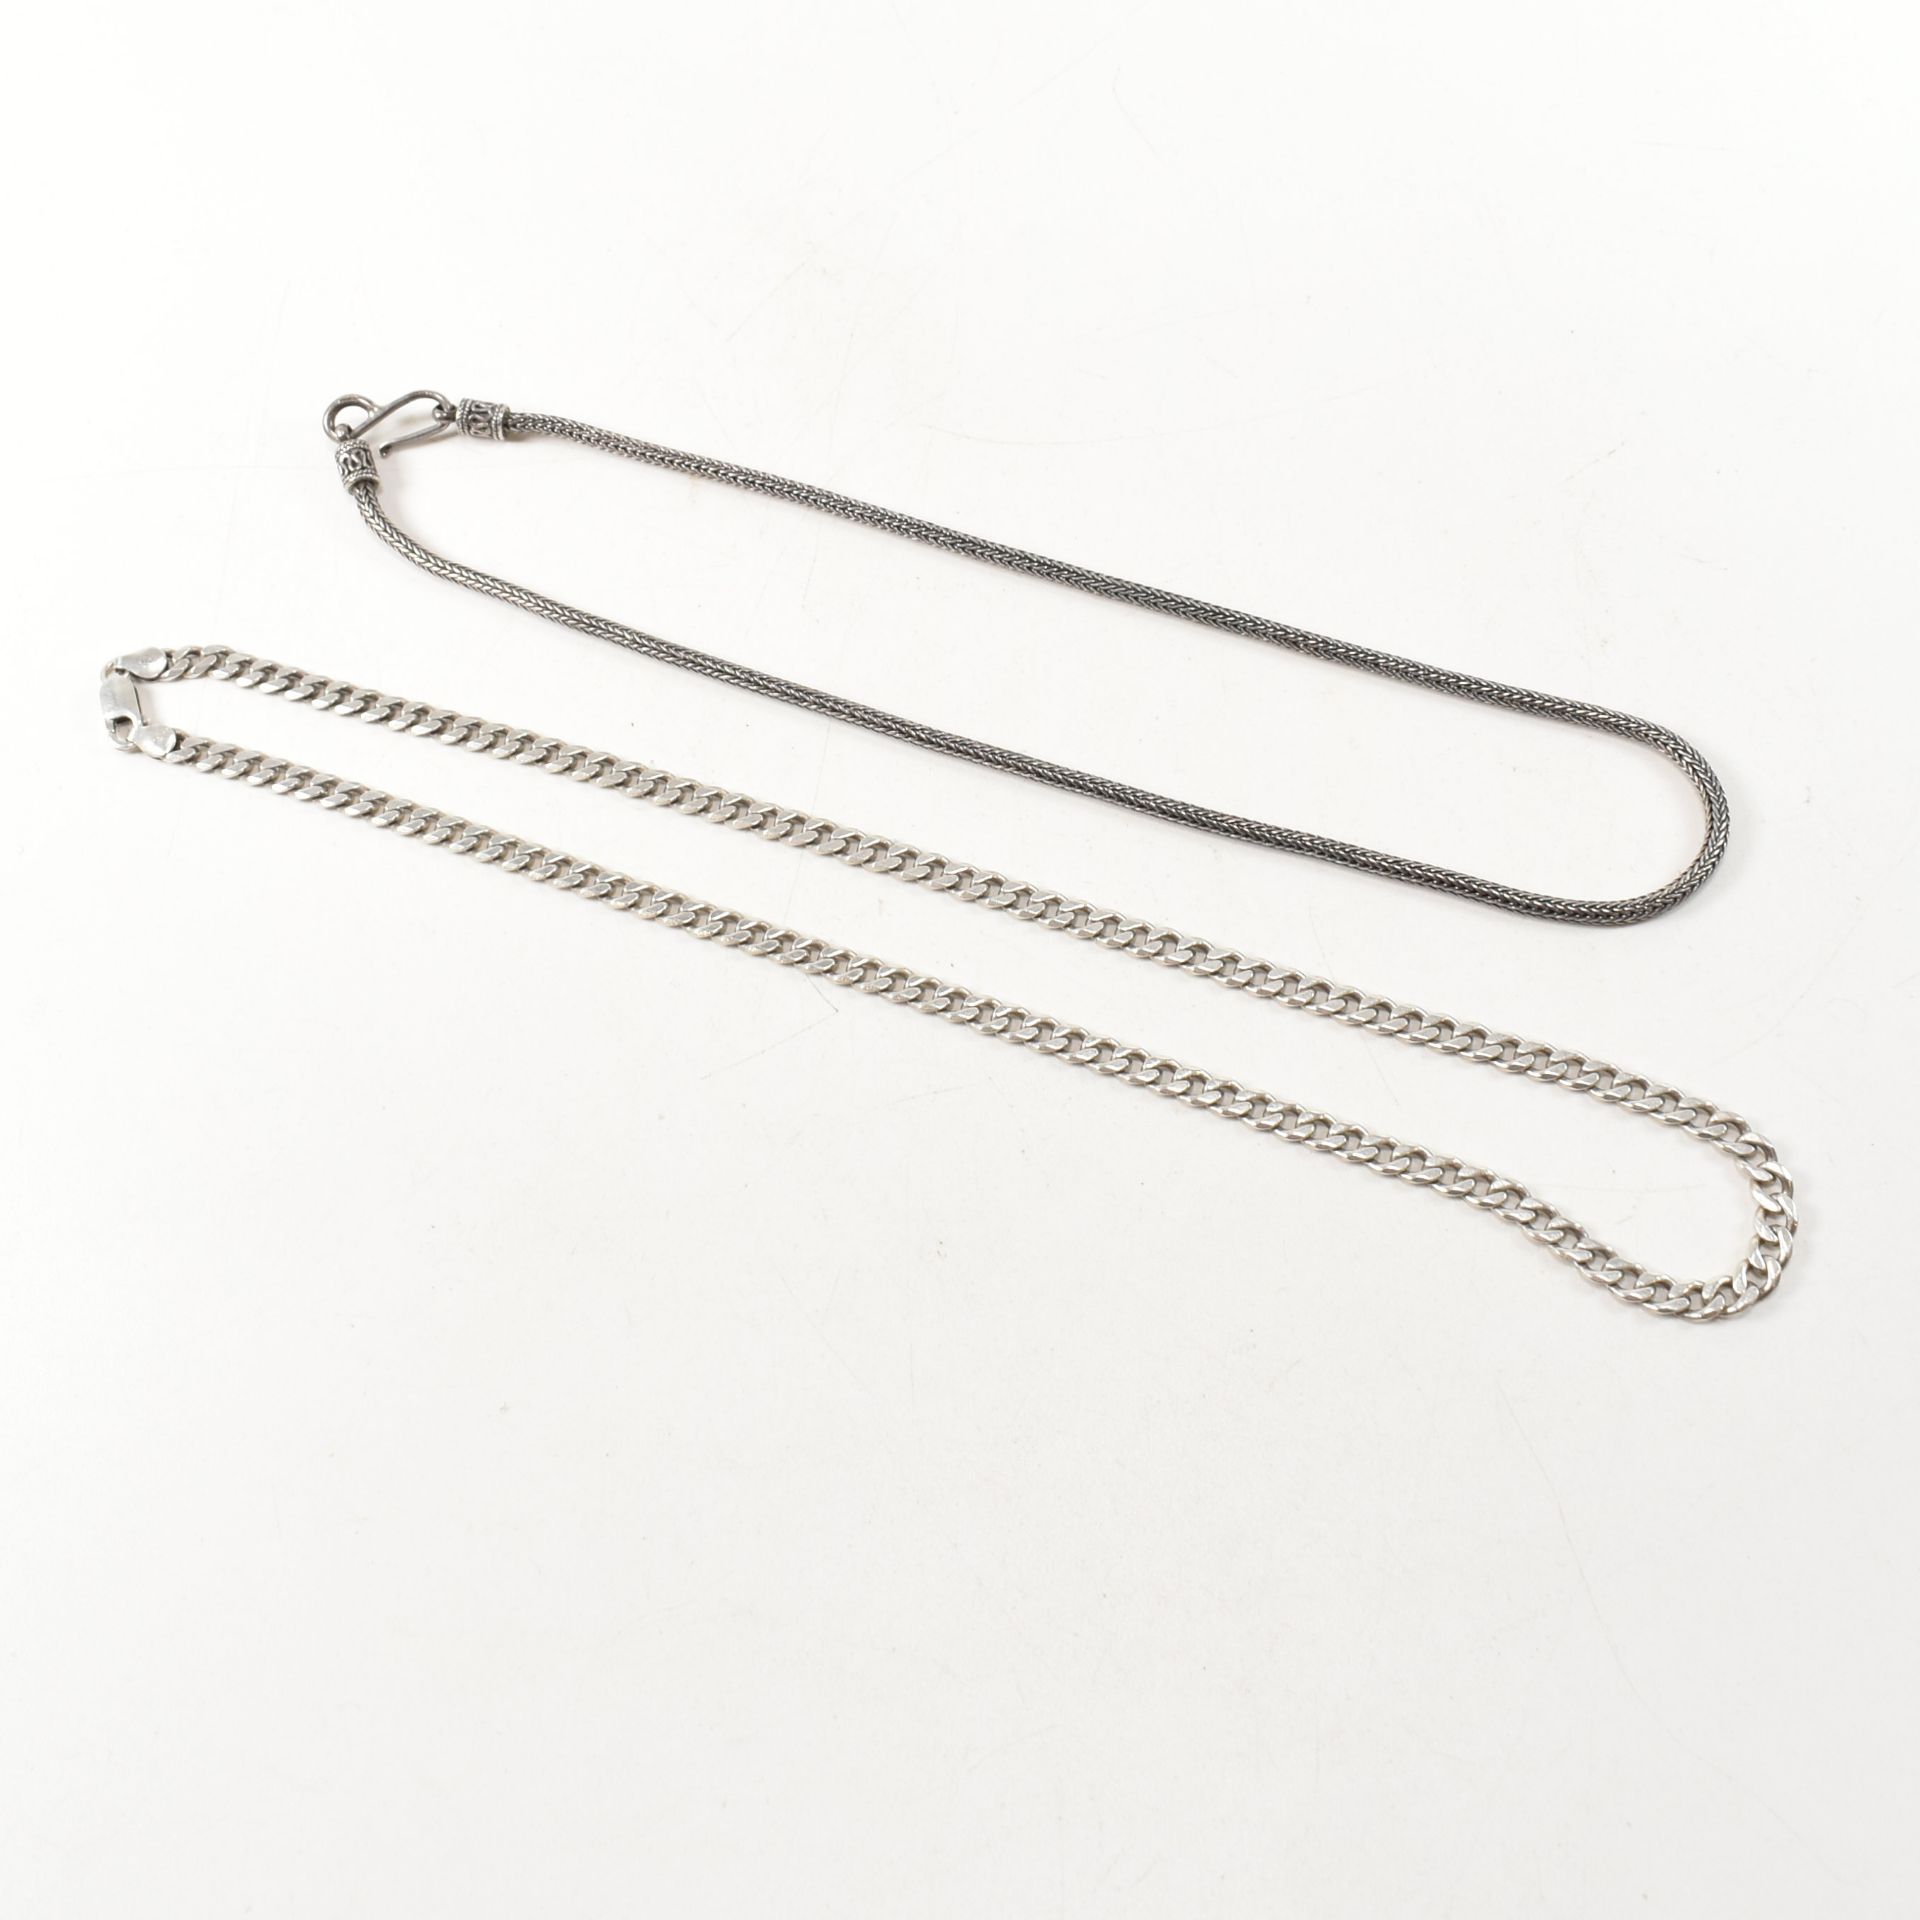 TWO 925 SILVER CHAIN NECKLACES - Image 2 of 4